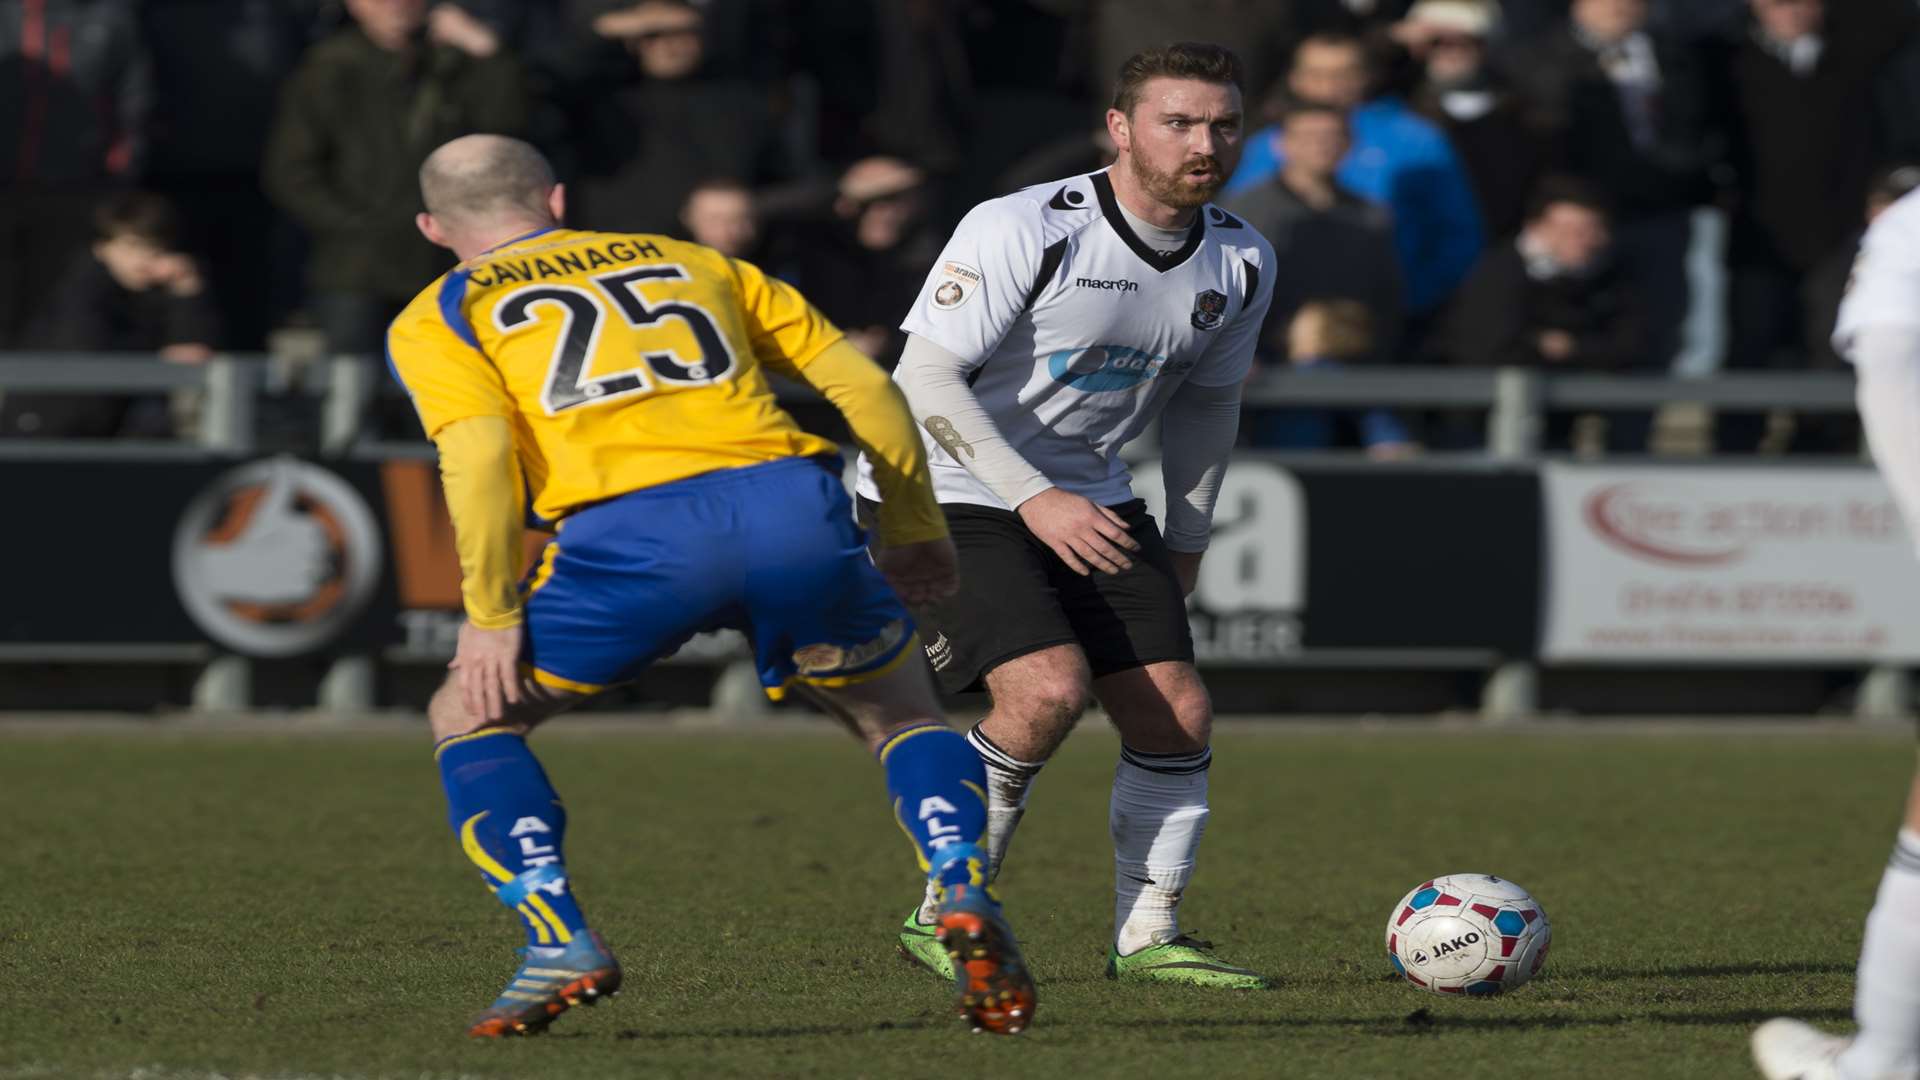 Dartford midfielder Peter Sweeney takes on Altrincham's Peter Cavanagh Picture: Andy Payton